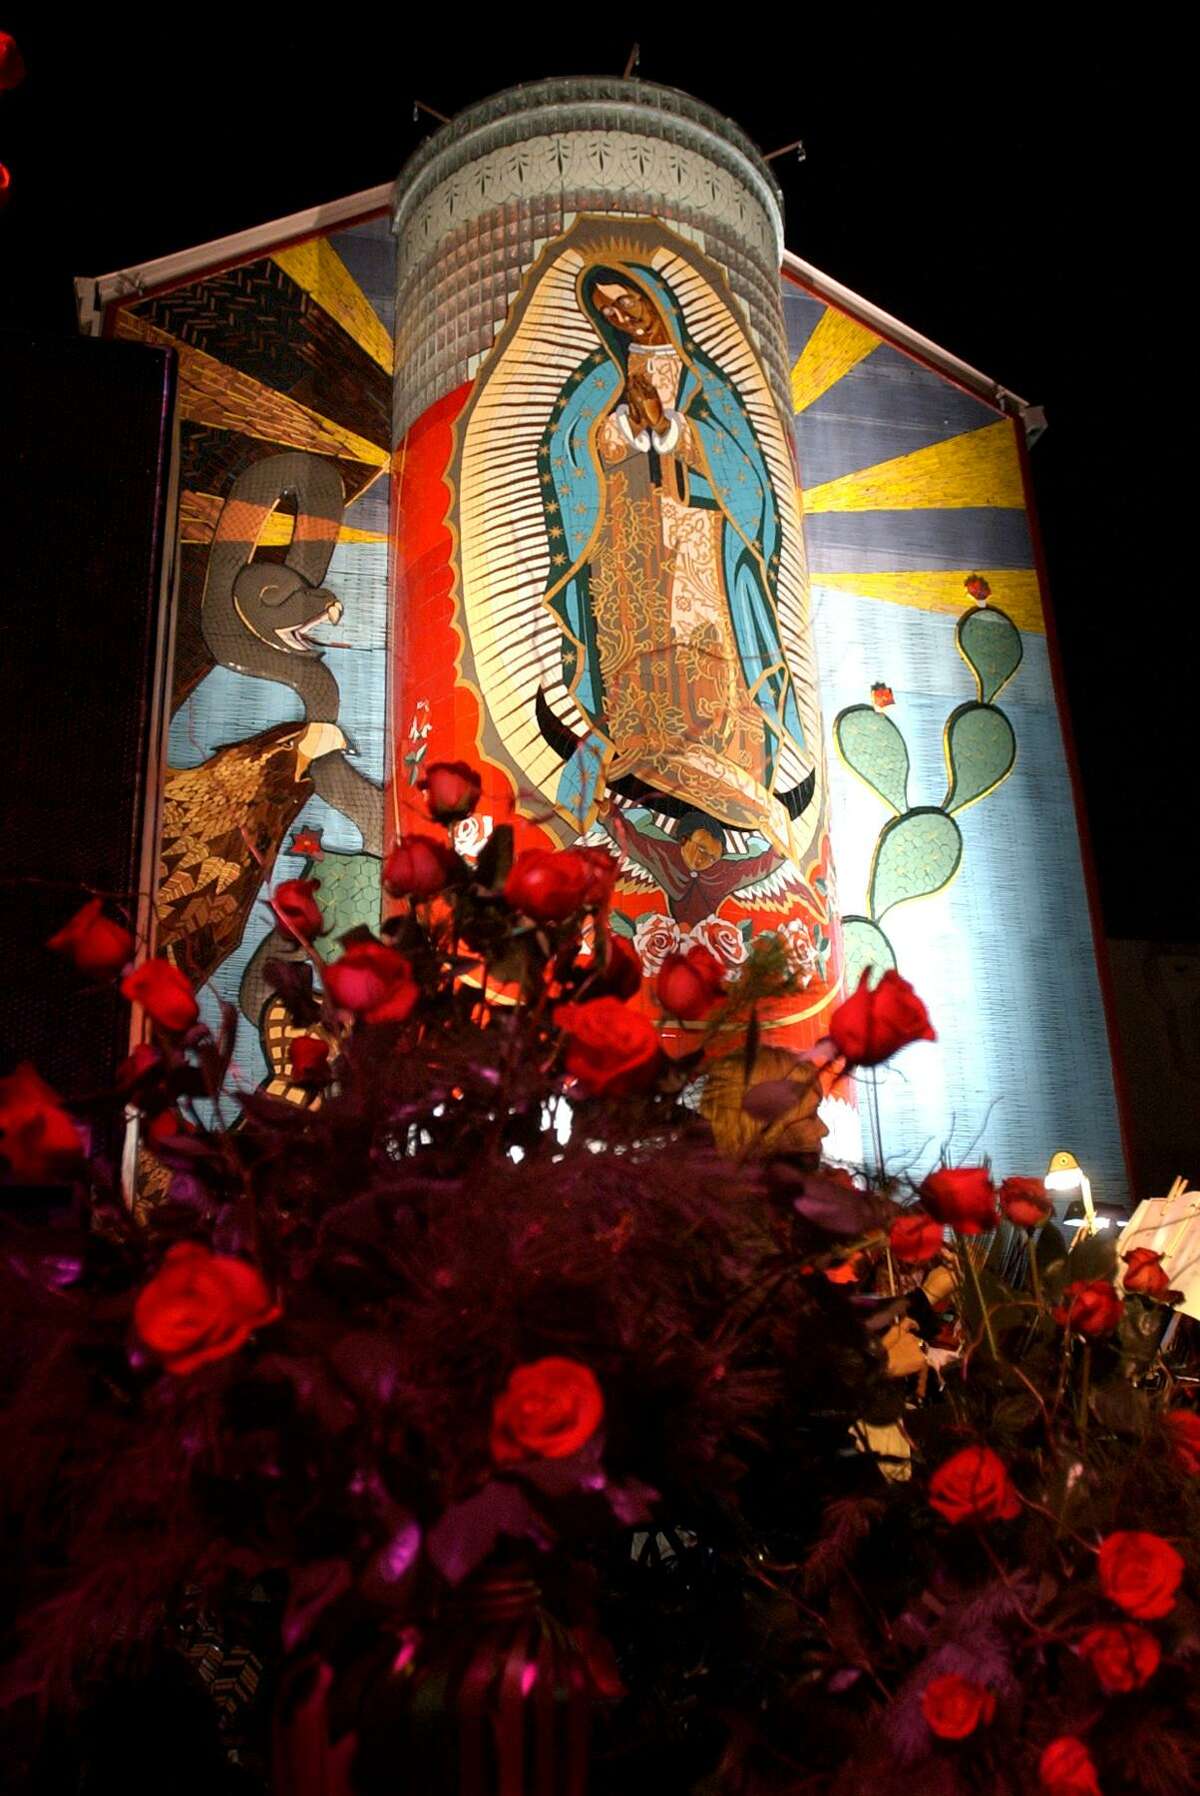 “La Veladora of Our Lady of Guadalupe” mosaic sculpture created by Jesse Trevino for the Guadalupe Cultural Arts Center was unveiled in 2003.